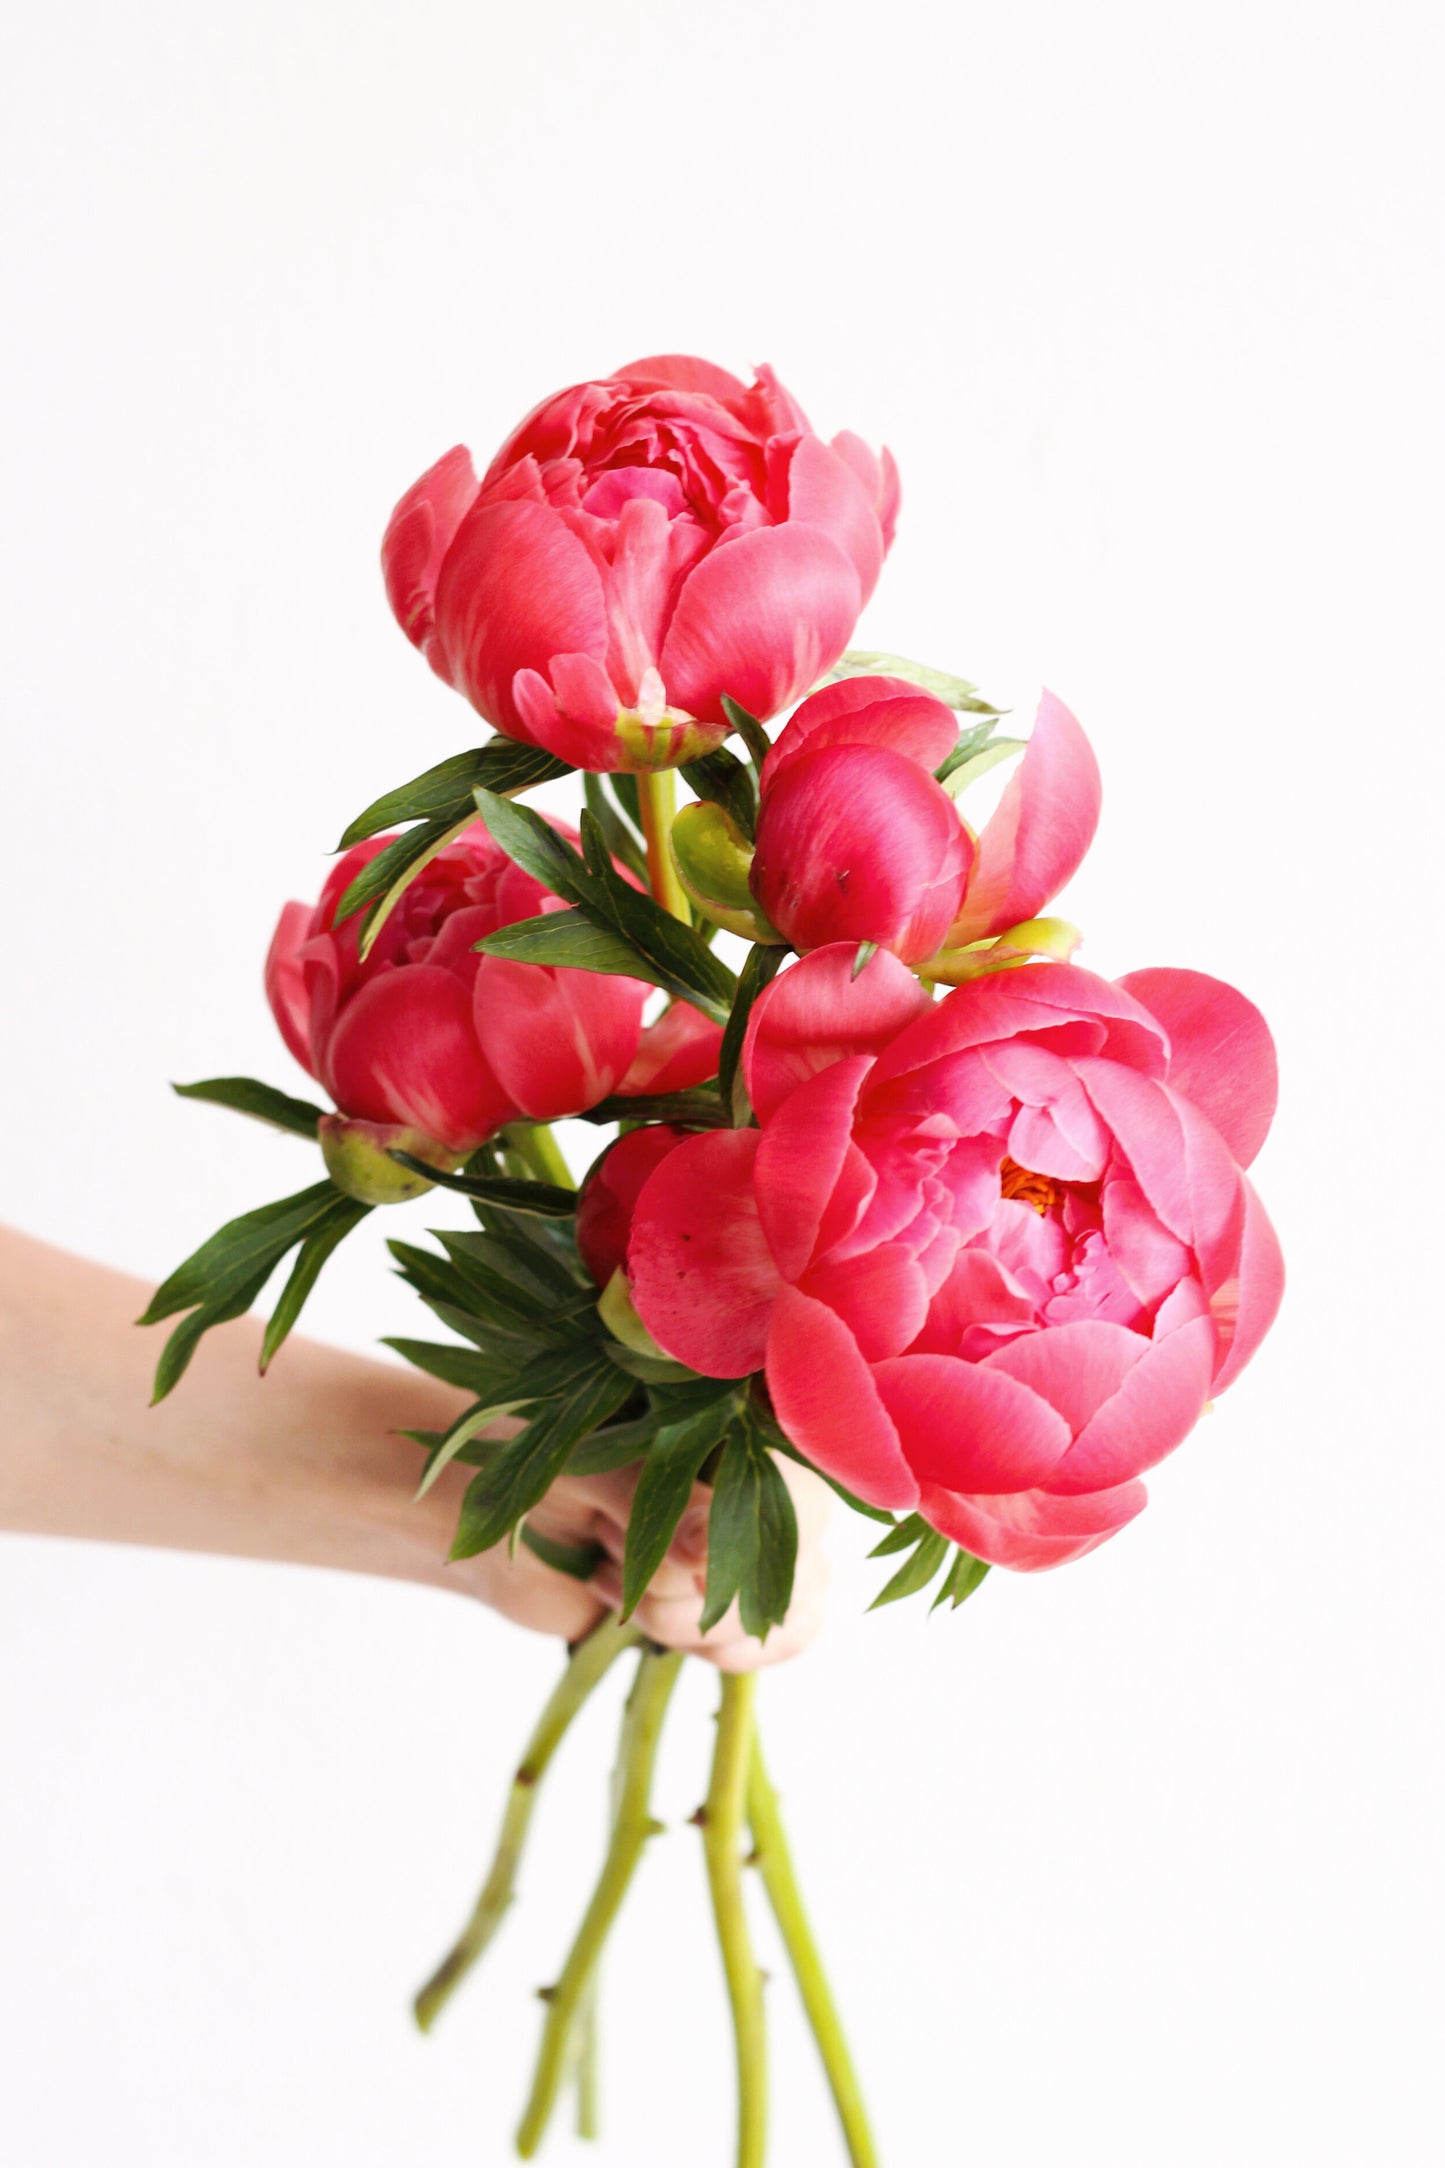 Seasonal Peonies - Limited Time Only!